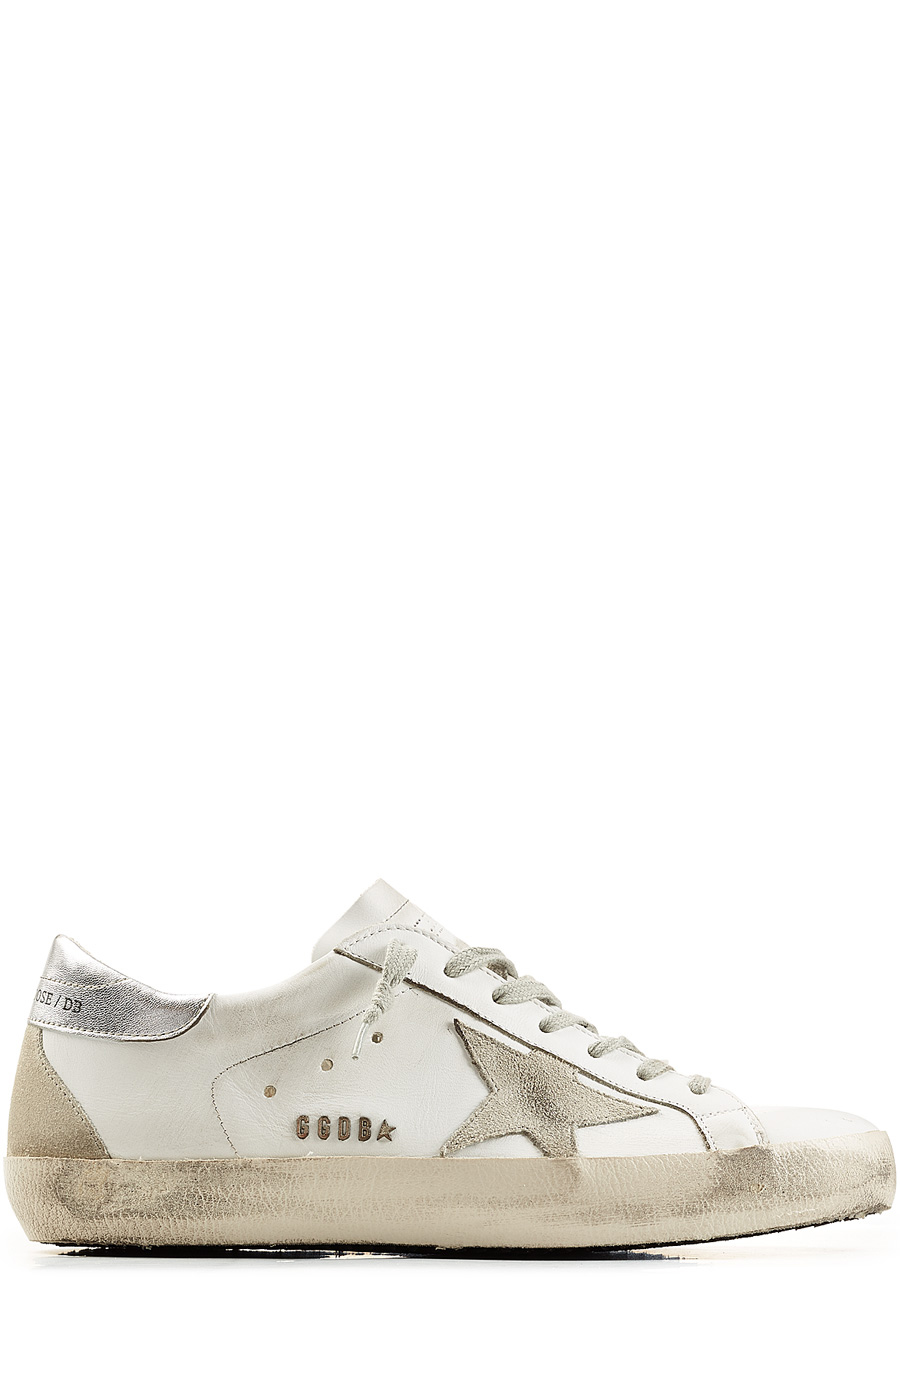 Golden Goose Super Star Leather Sneakers | ModeSens